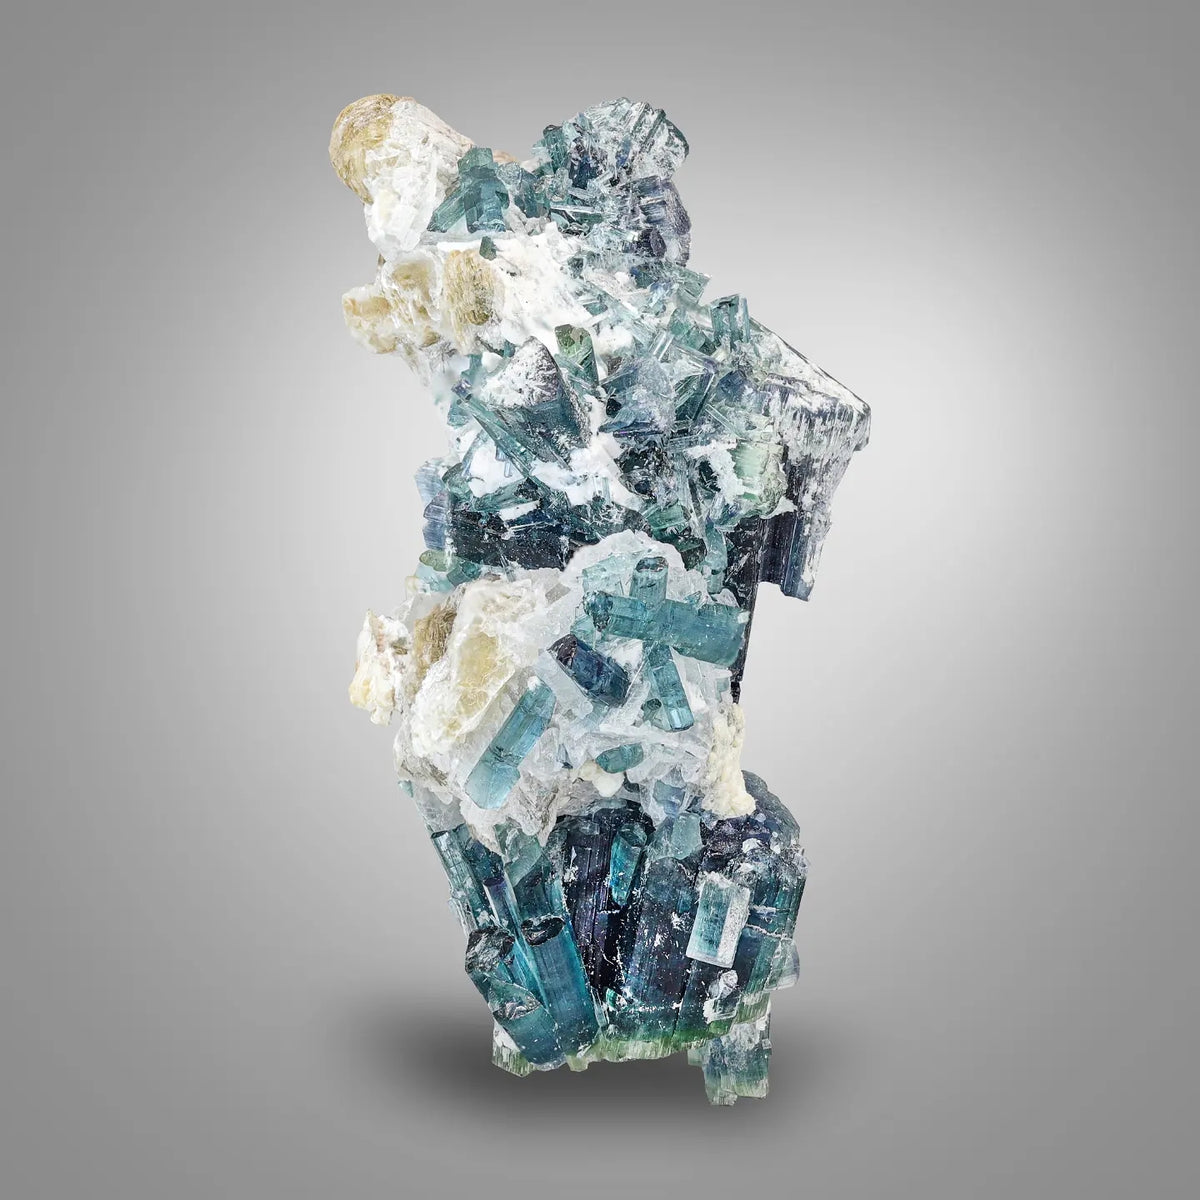 Indicolite Blue Tourmaline Crystals with Albite from Darrah I Pech, Kunnar, Afghanistan